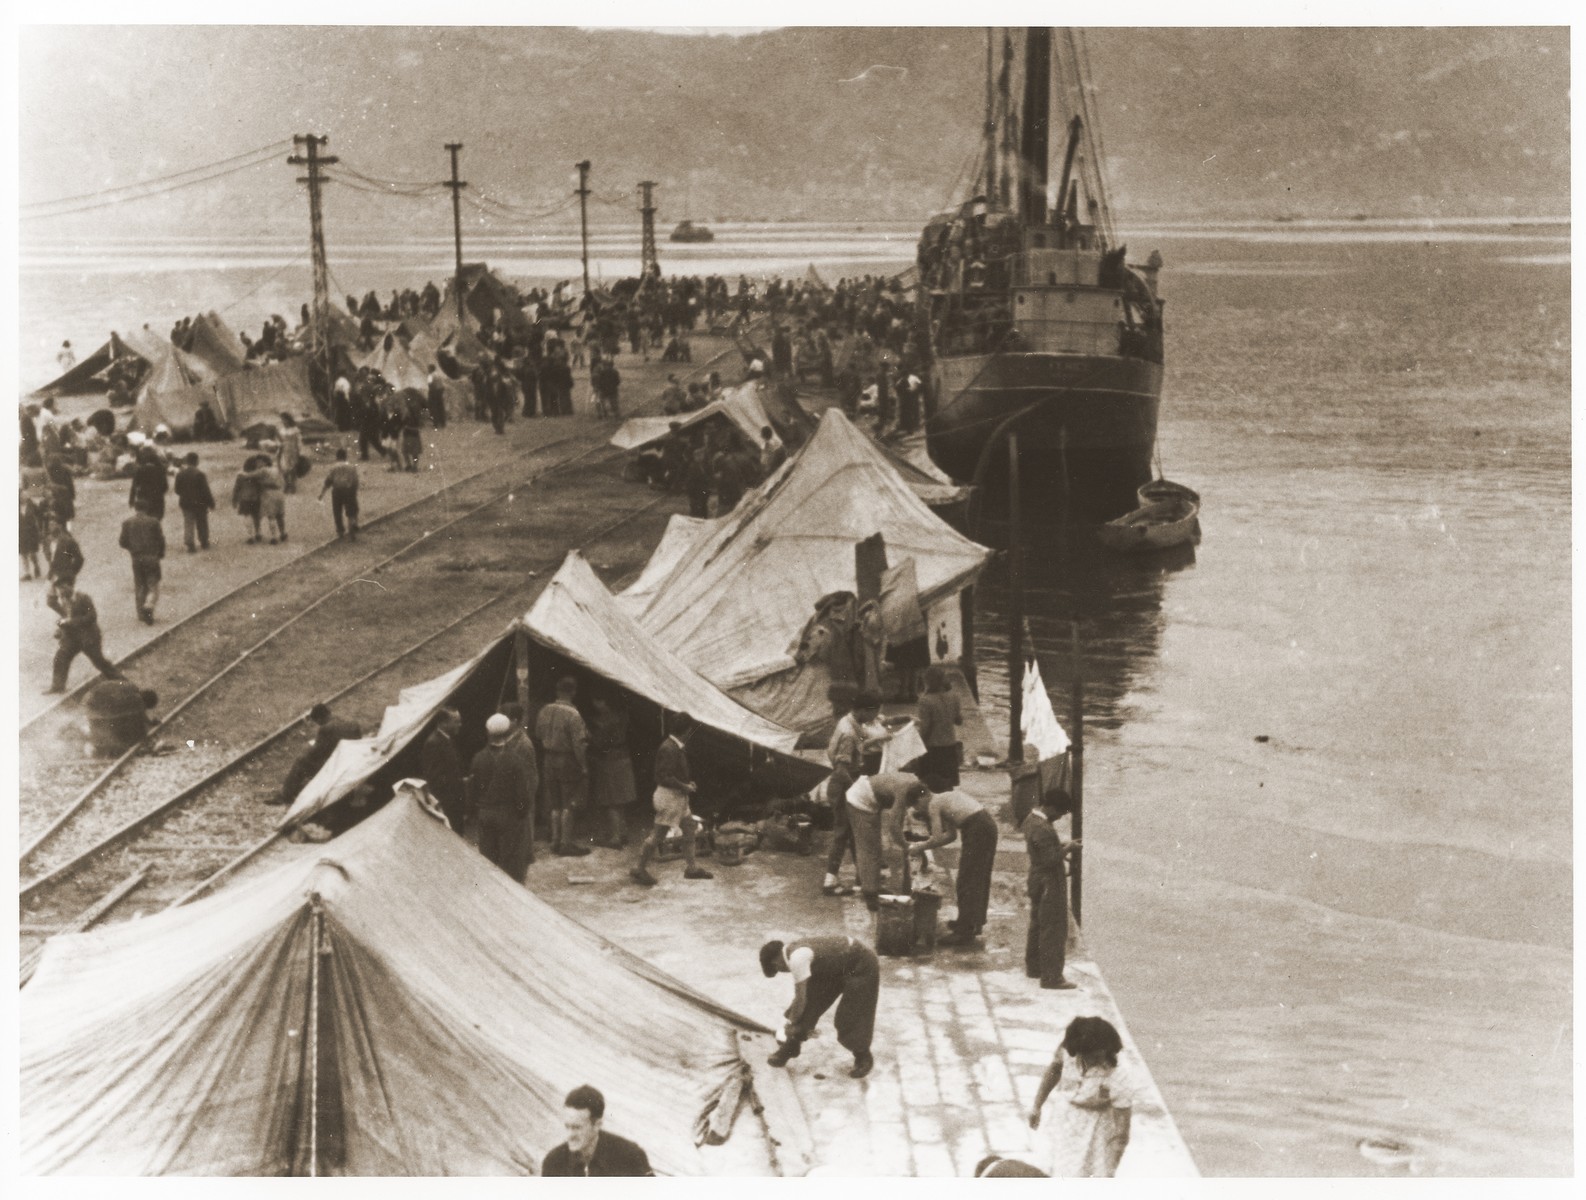 Jewish DPs pitching tents on the pier in La Spezia harbor, where they are holding a hunger strike to protest Britain's refusal to let them sail to Palestine.